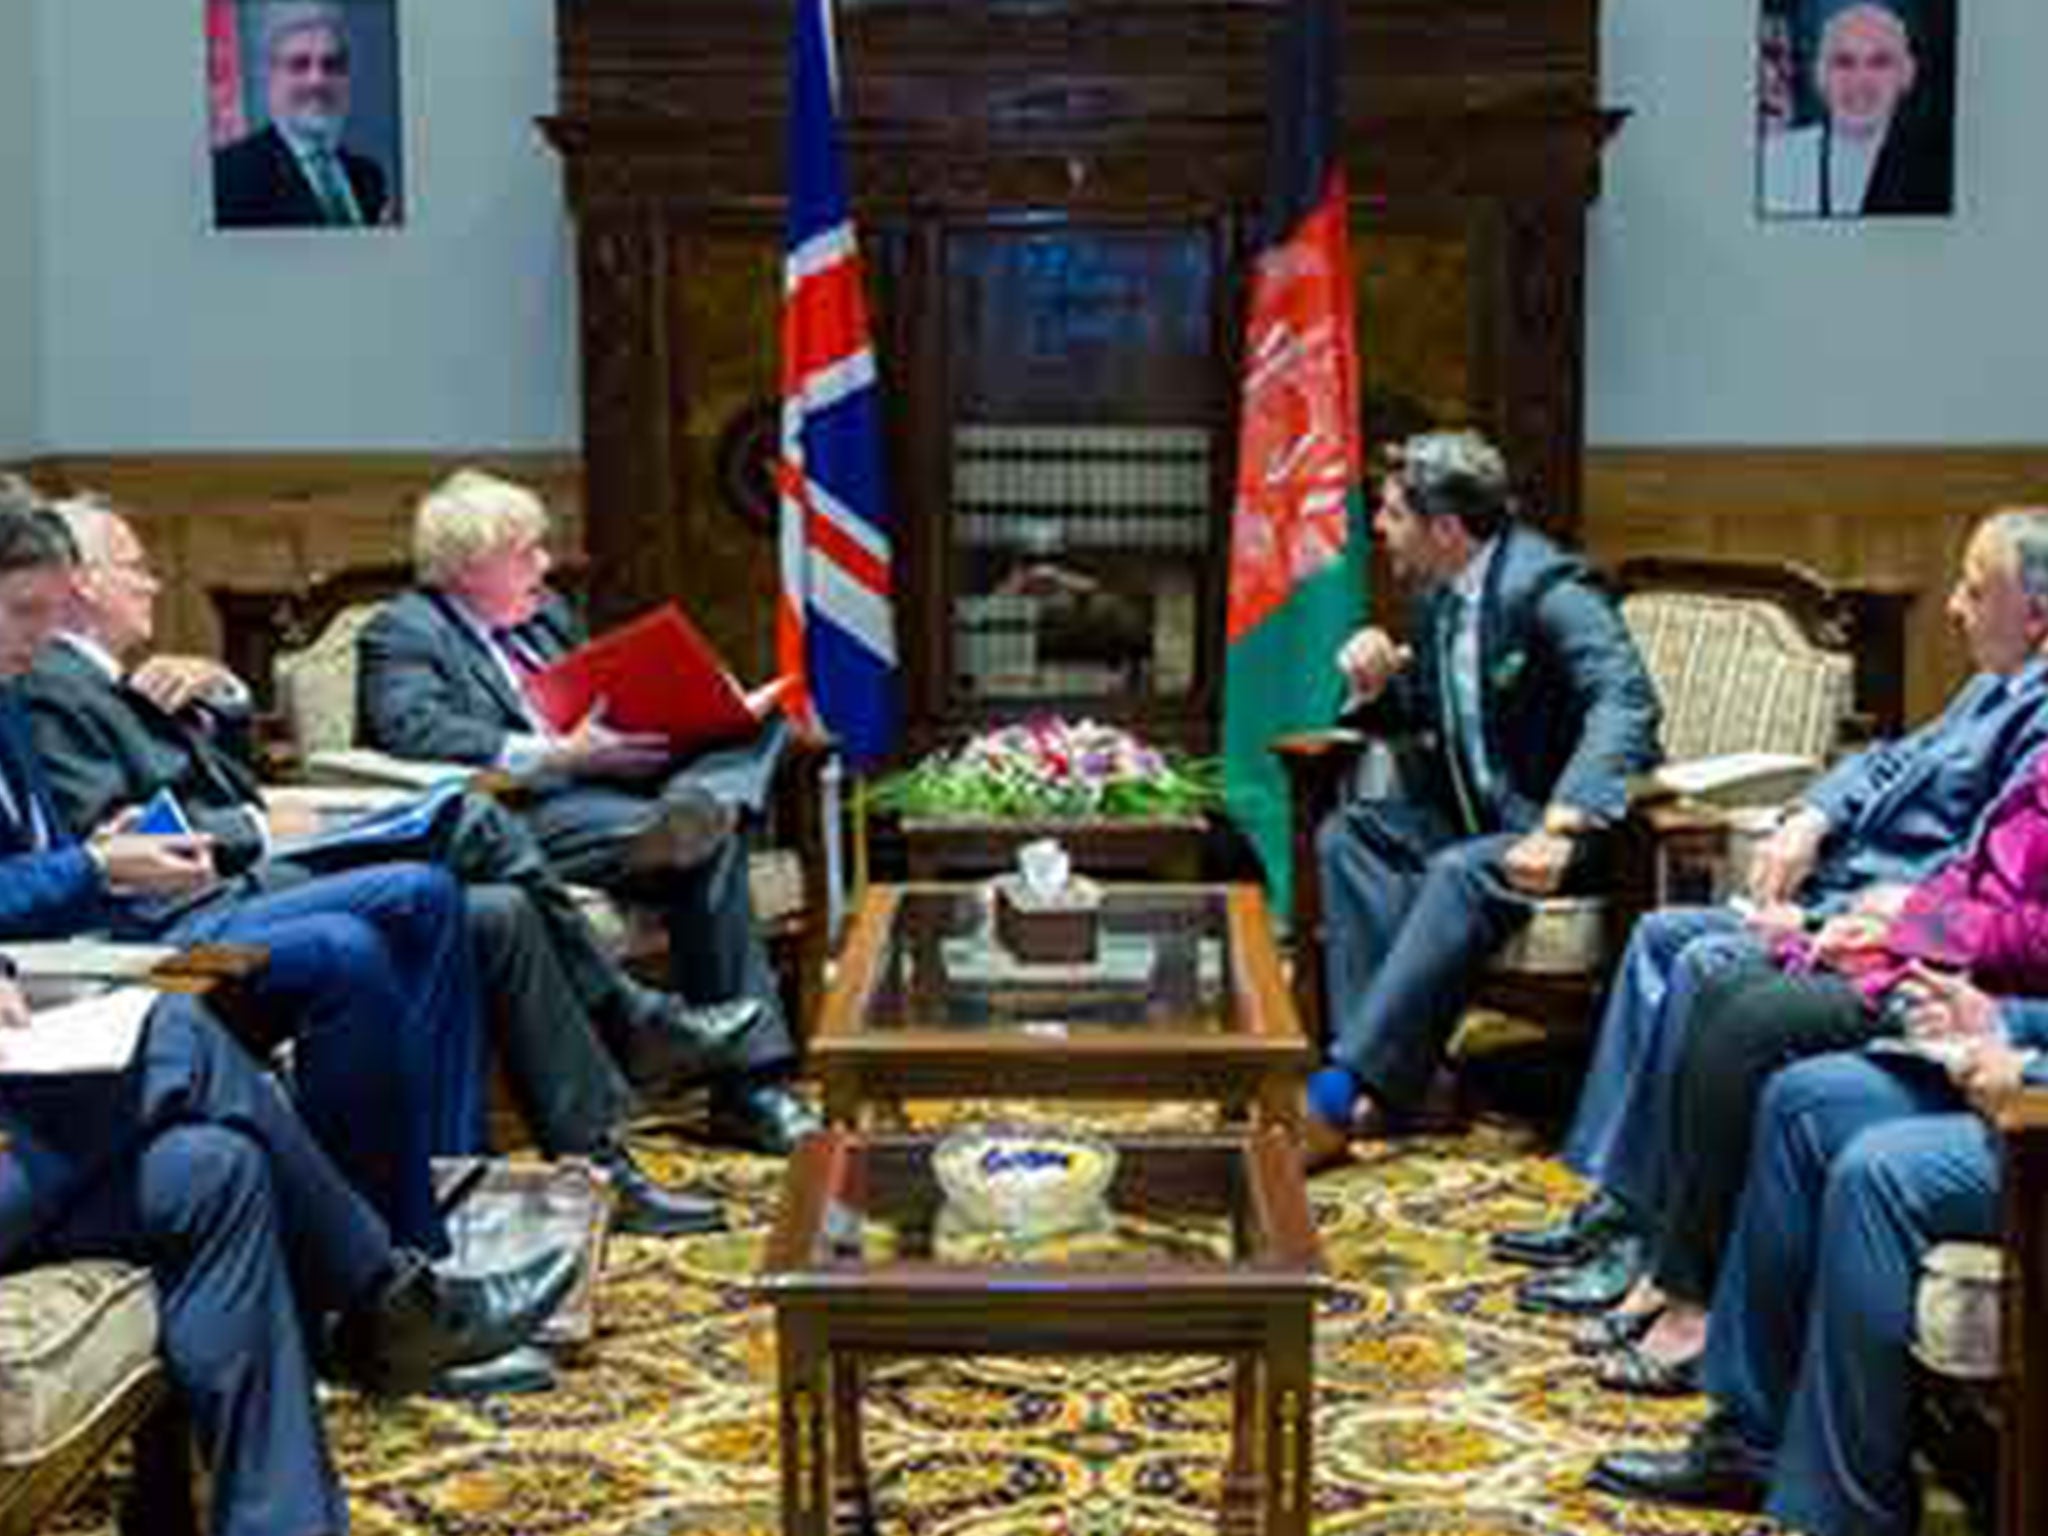 Boris Johnson meeting his Afghan counterpart in Kabul on the day MPs vote on Heathrow expansion